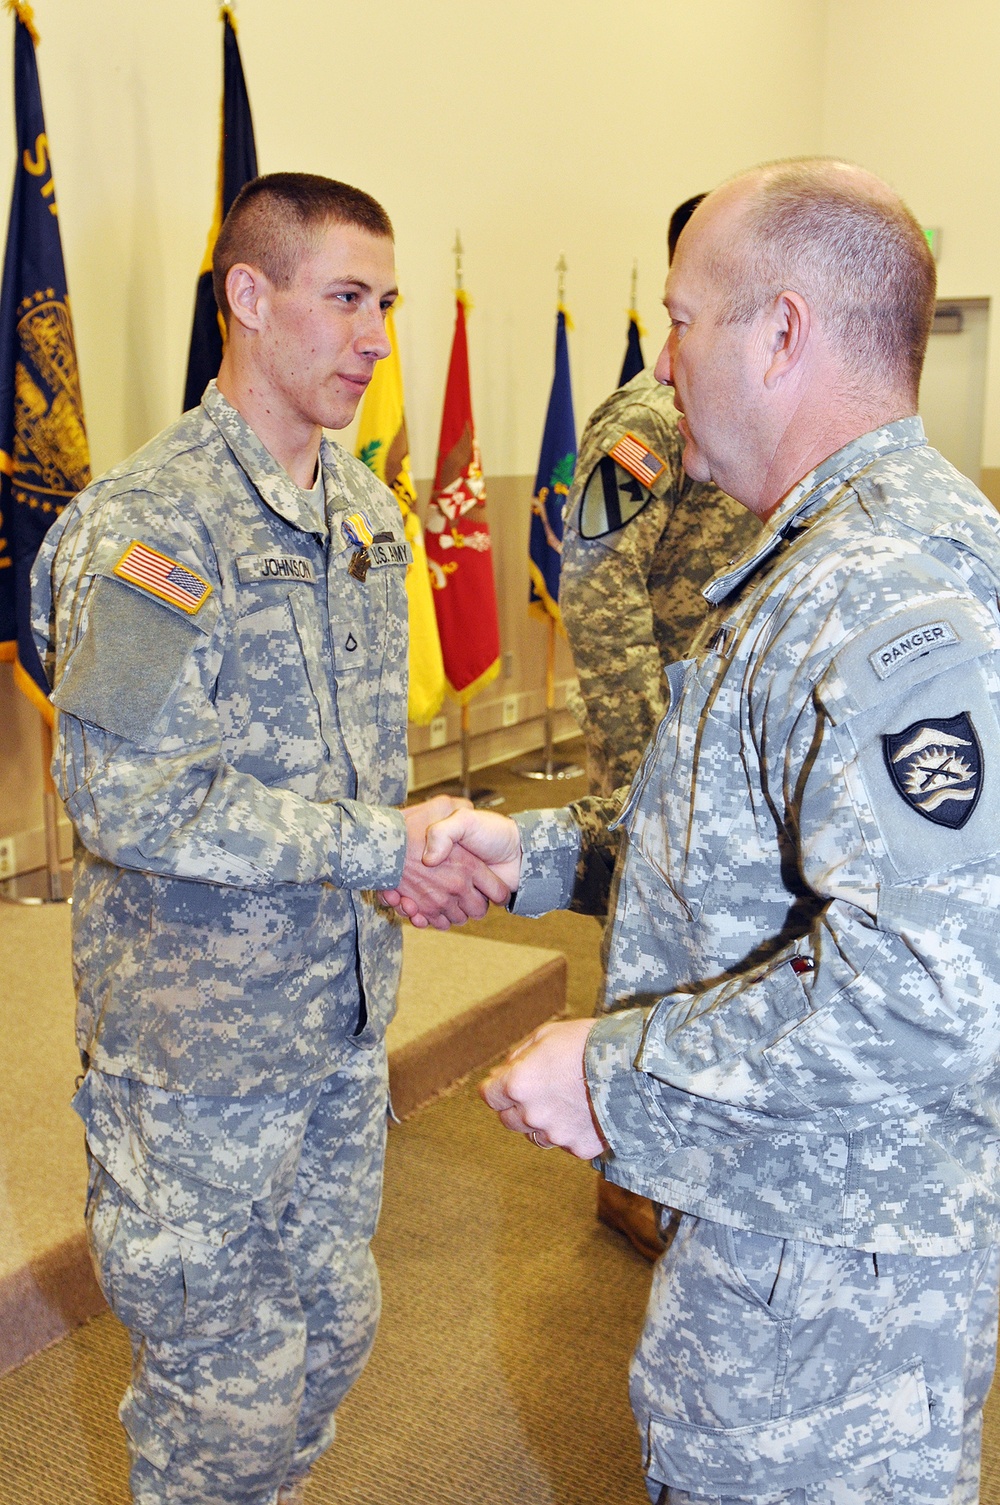 Oregon National Guard soldier of the Year